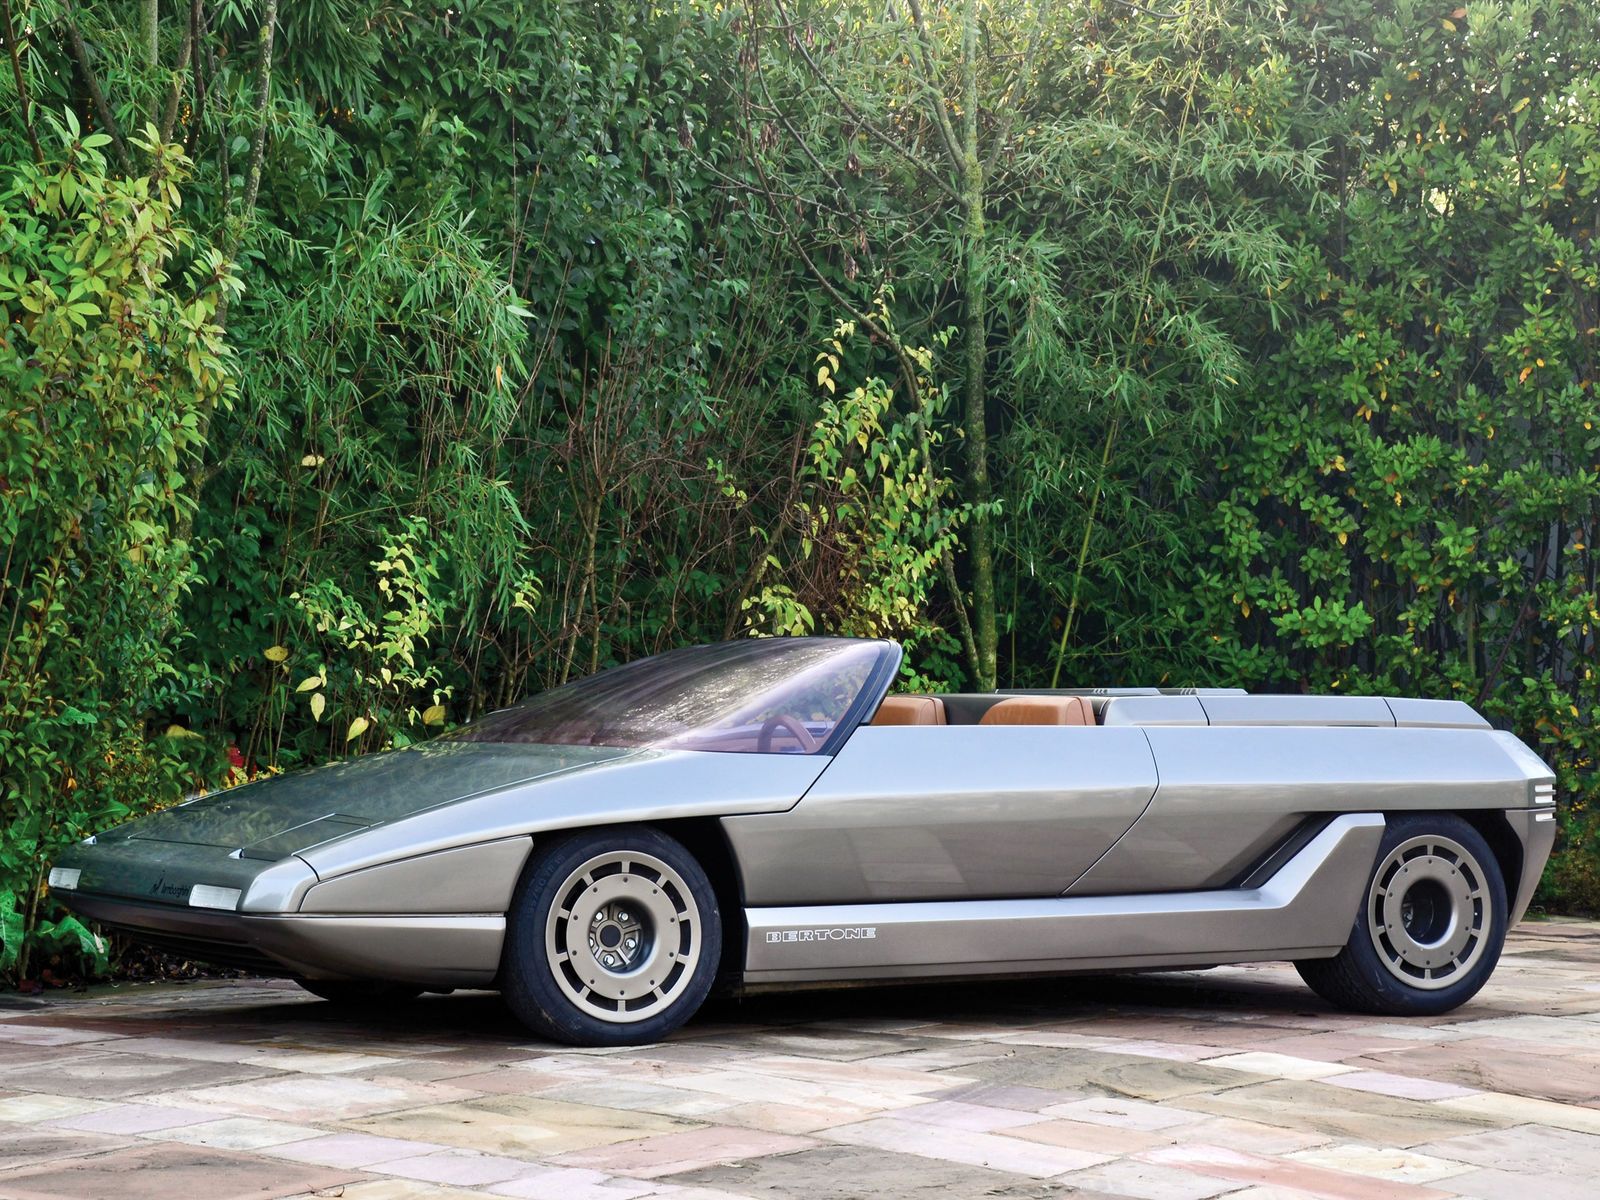 30 incredibly bonkers and beautiful cars from the 1950s to now image 23